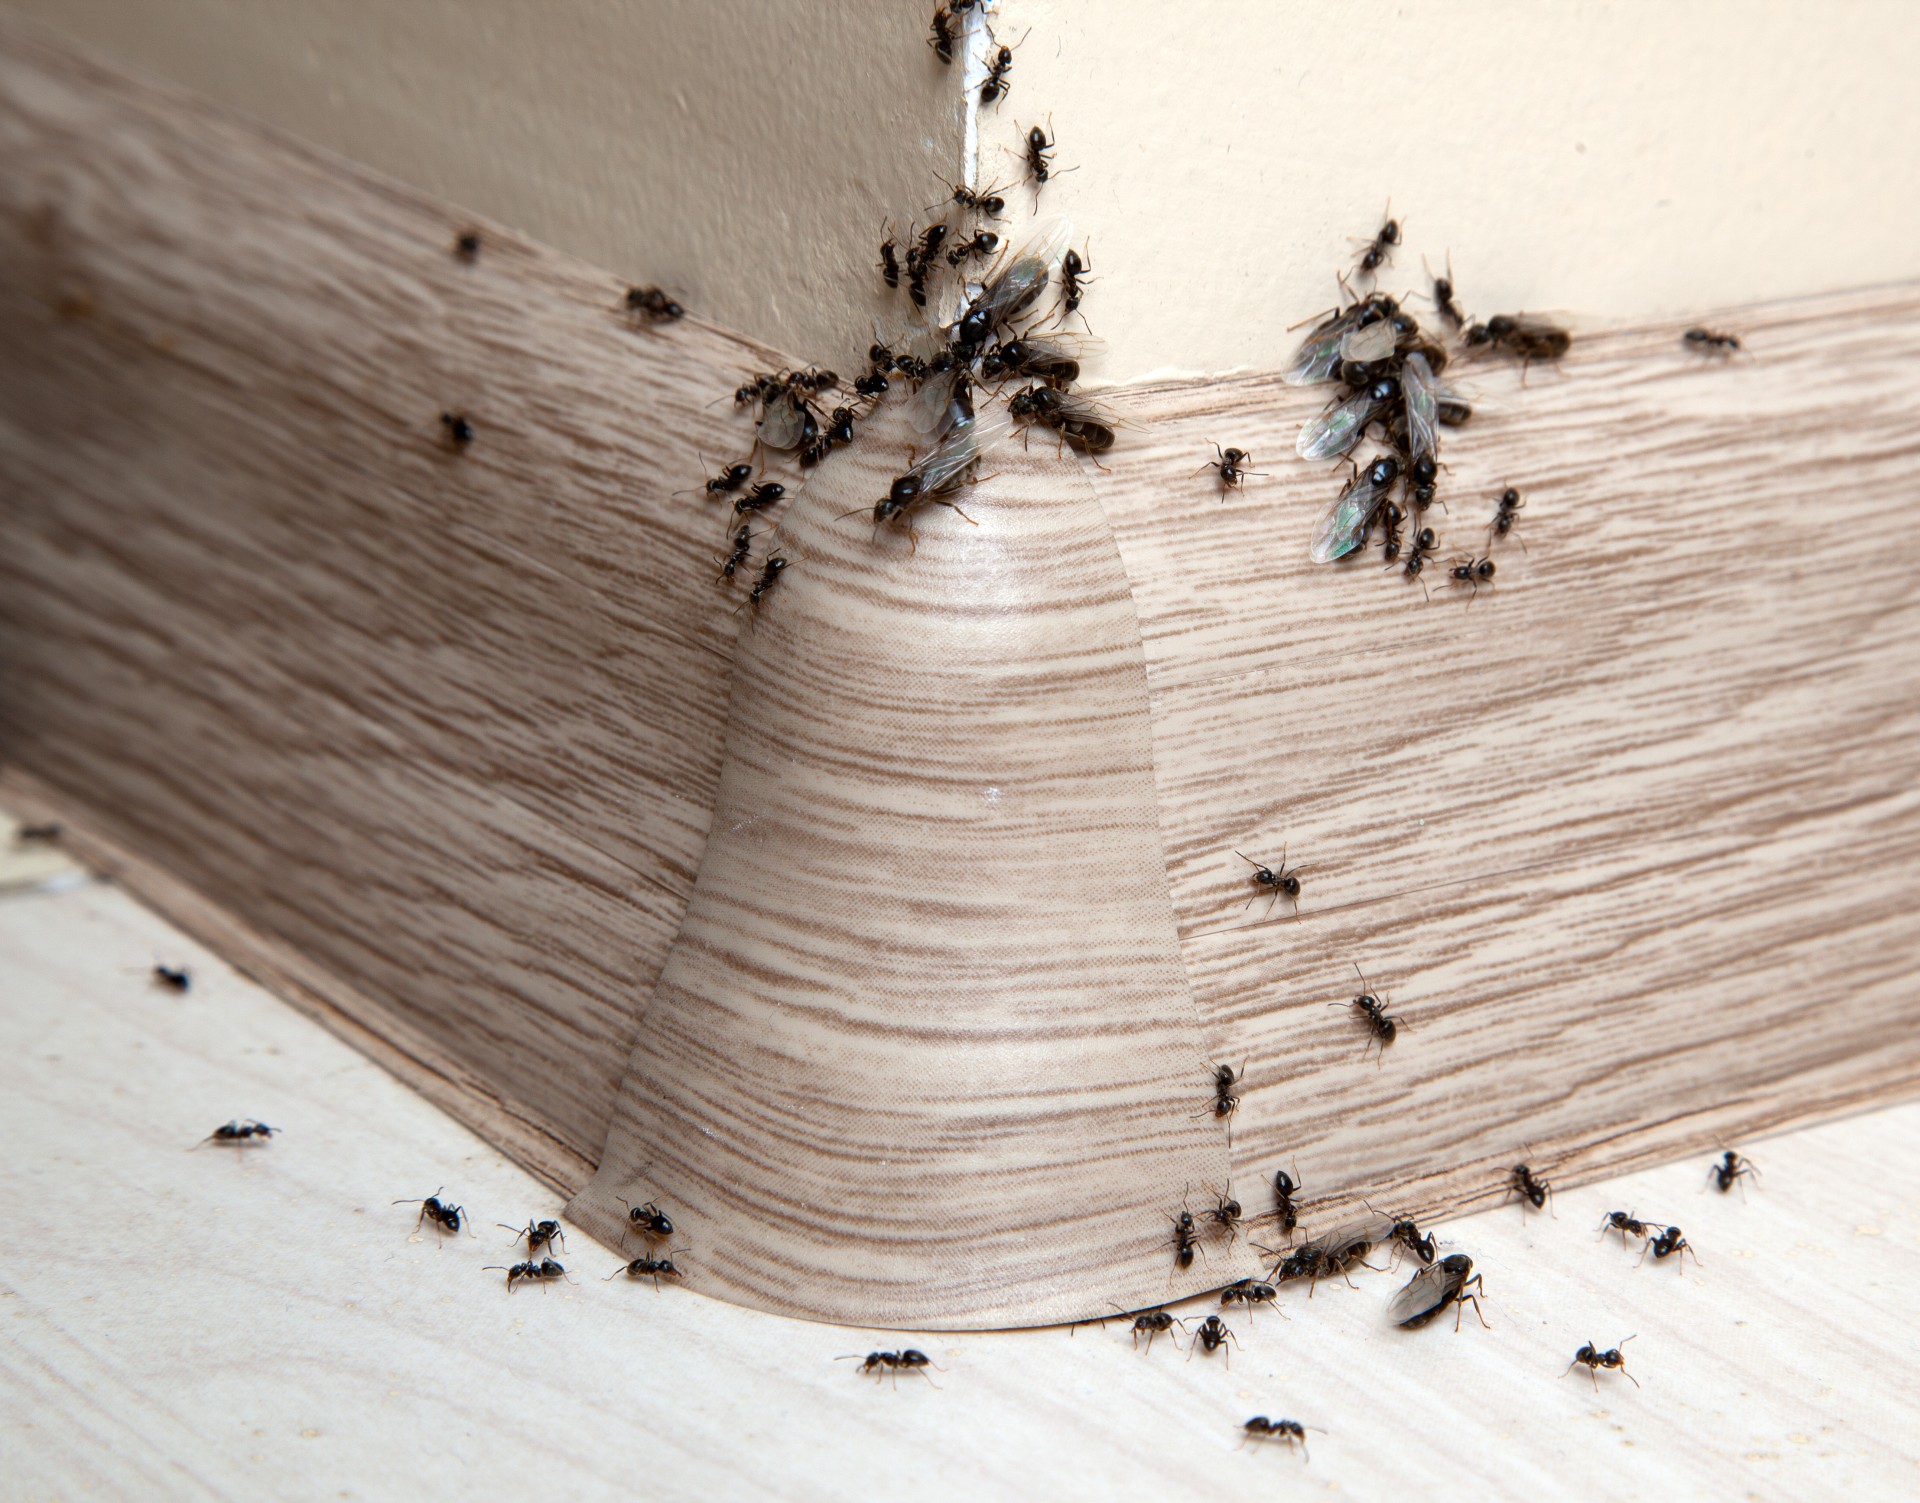 Ant Infestation, Pest Control in Walton-on-Thames, Hersham, KT12. Call Now 020 8166 9746